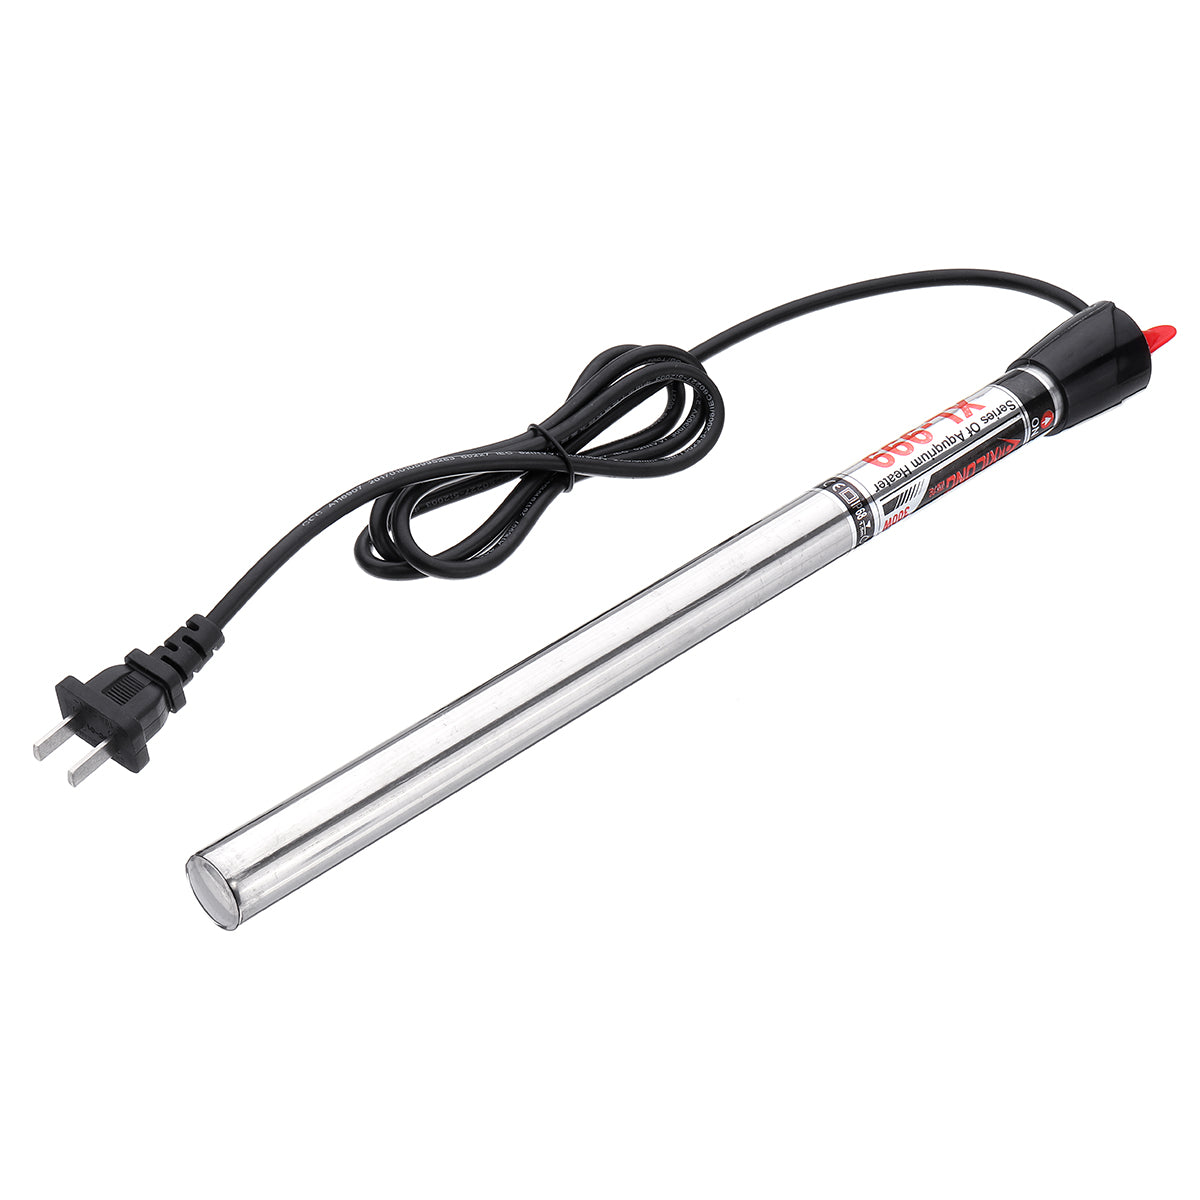 Submersible 300W Heater